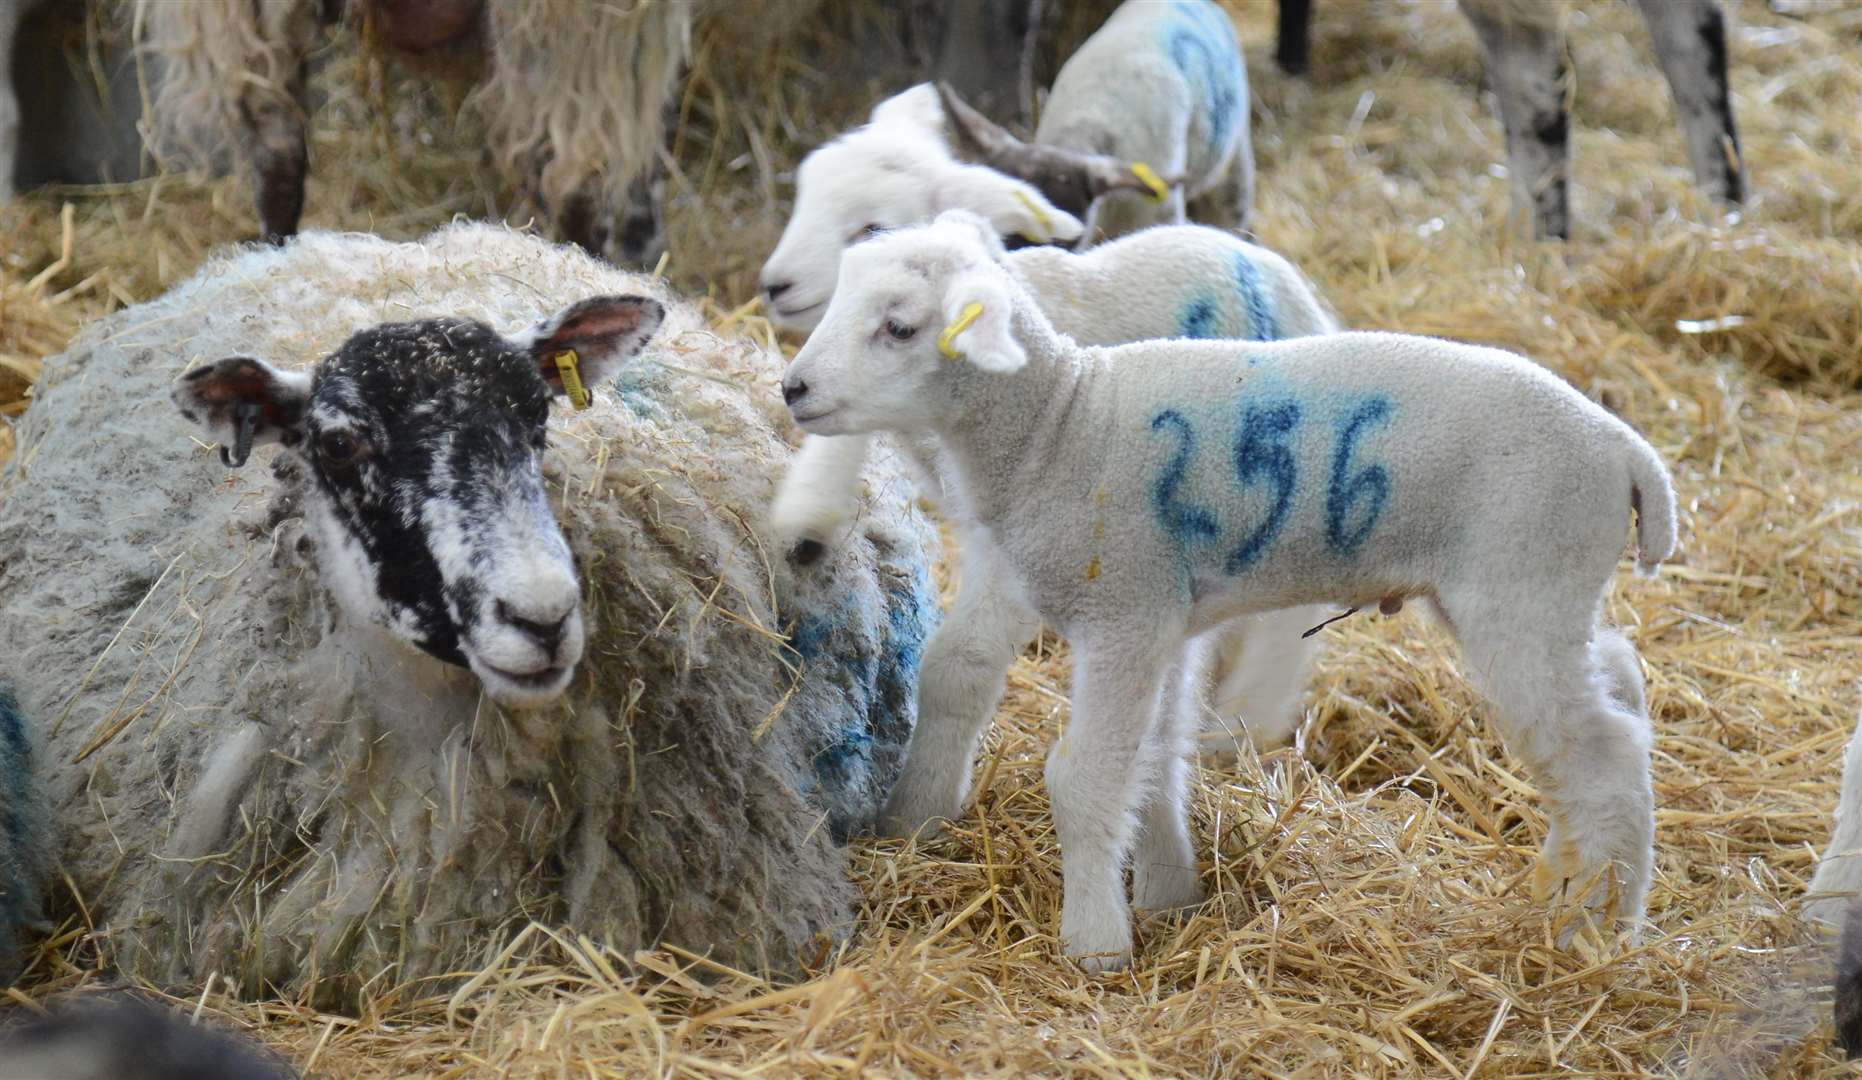 Hadlow Colleges lecturers will be in the lambing shed providing commentary during the day and answering any questions. Picture: Gary Browne (7653997)